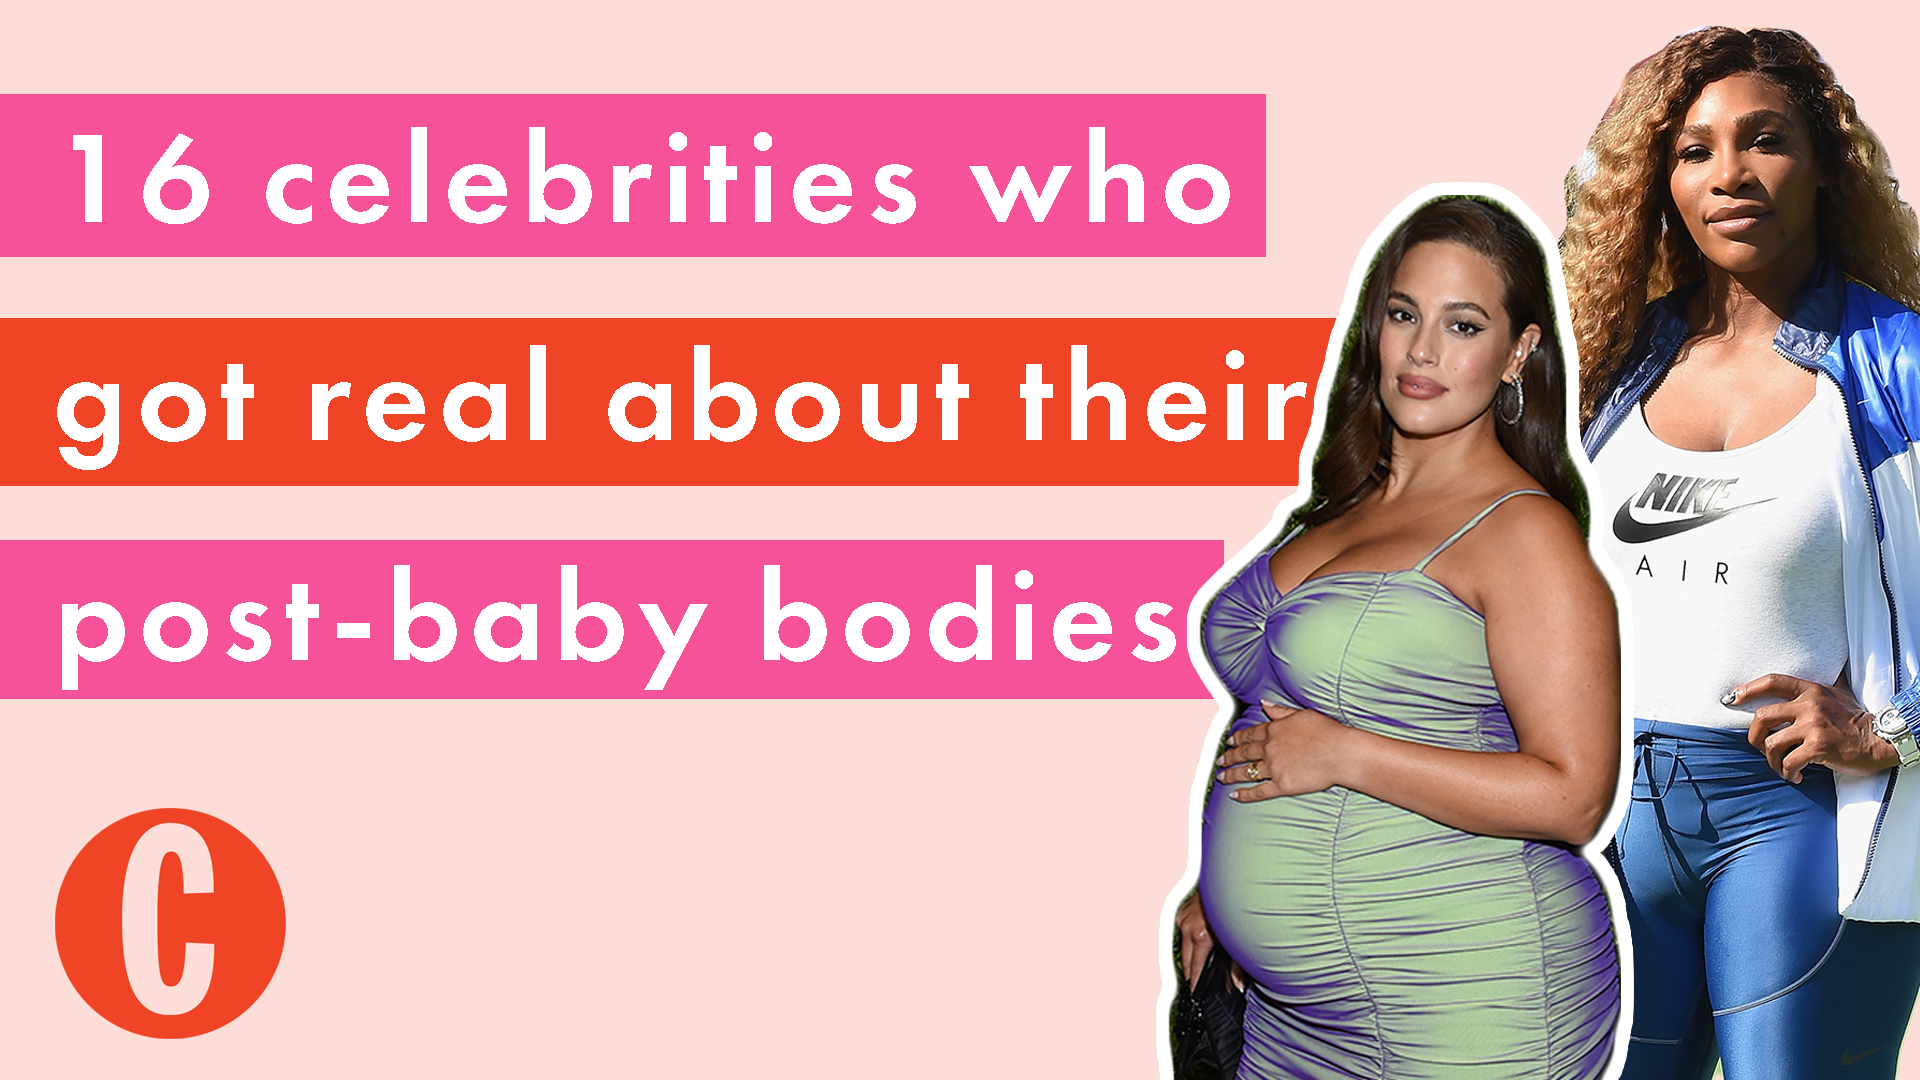 1920px x 1080px - 20 celebrities who got real about their post-baby bodies